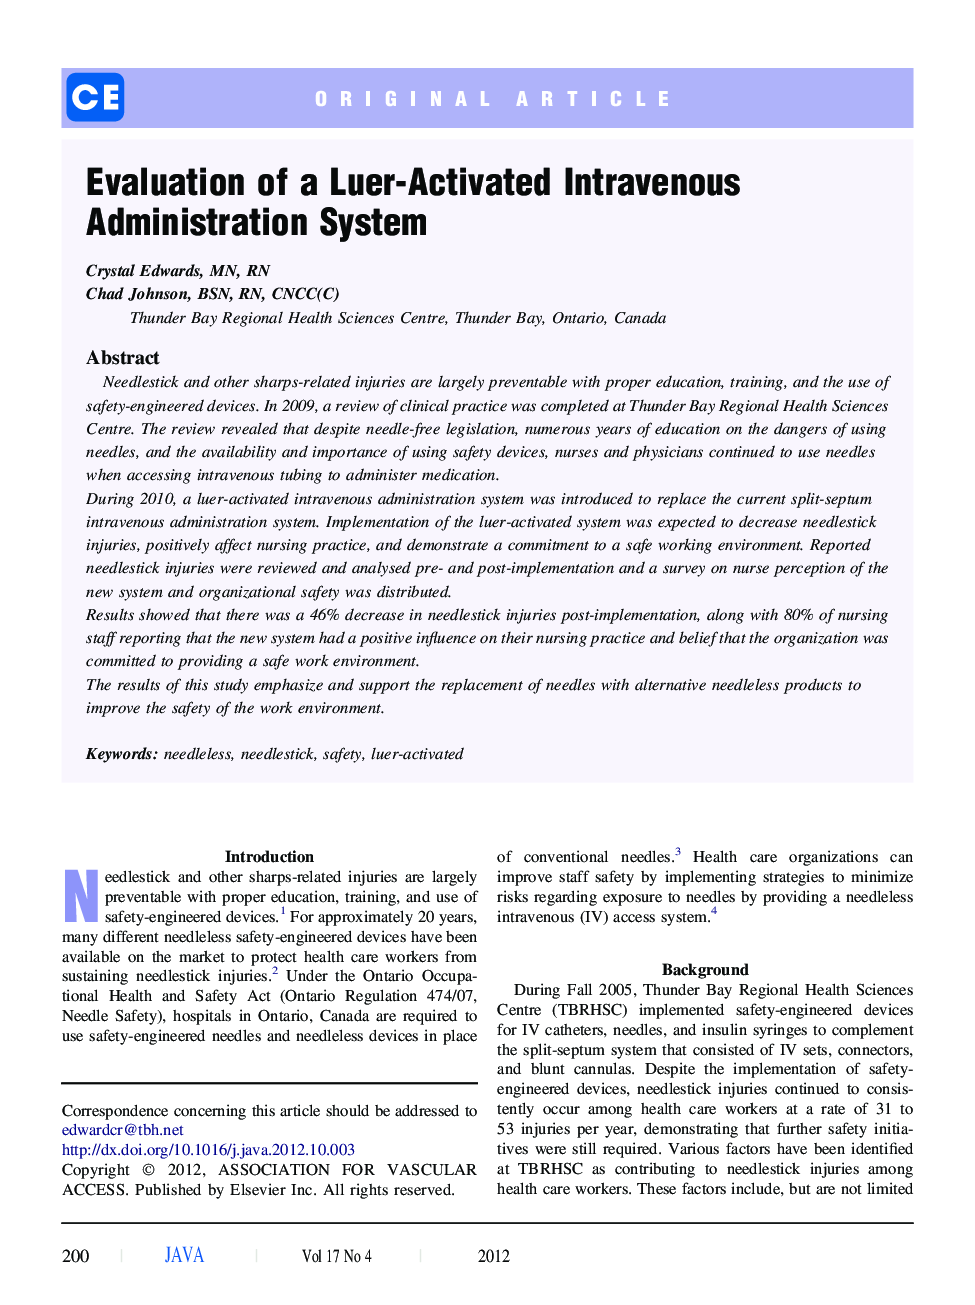 Evaluation of a Luer-Activated Intravenous Administration System